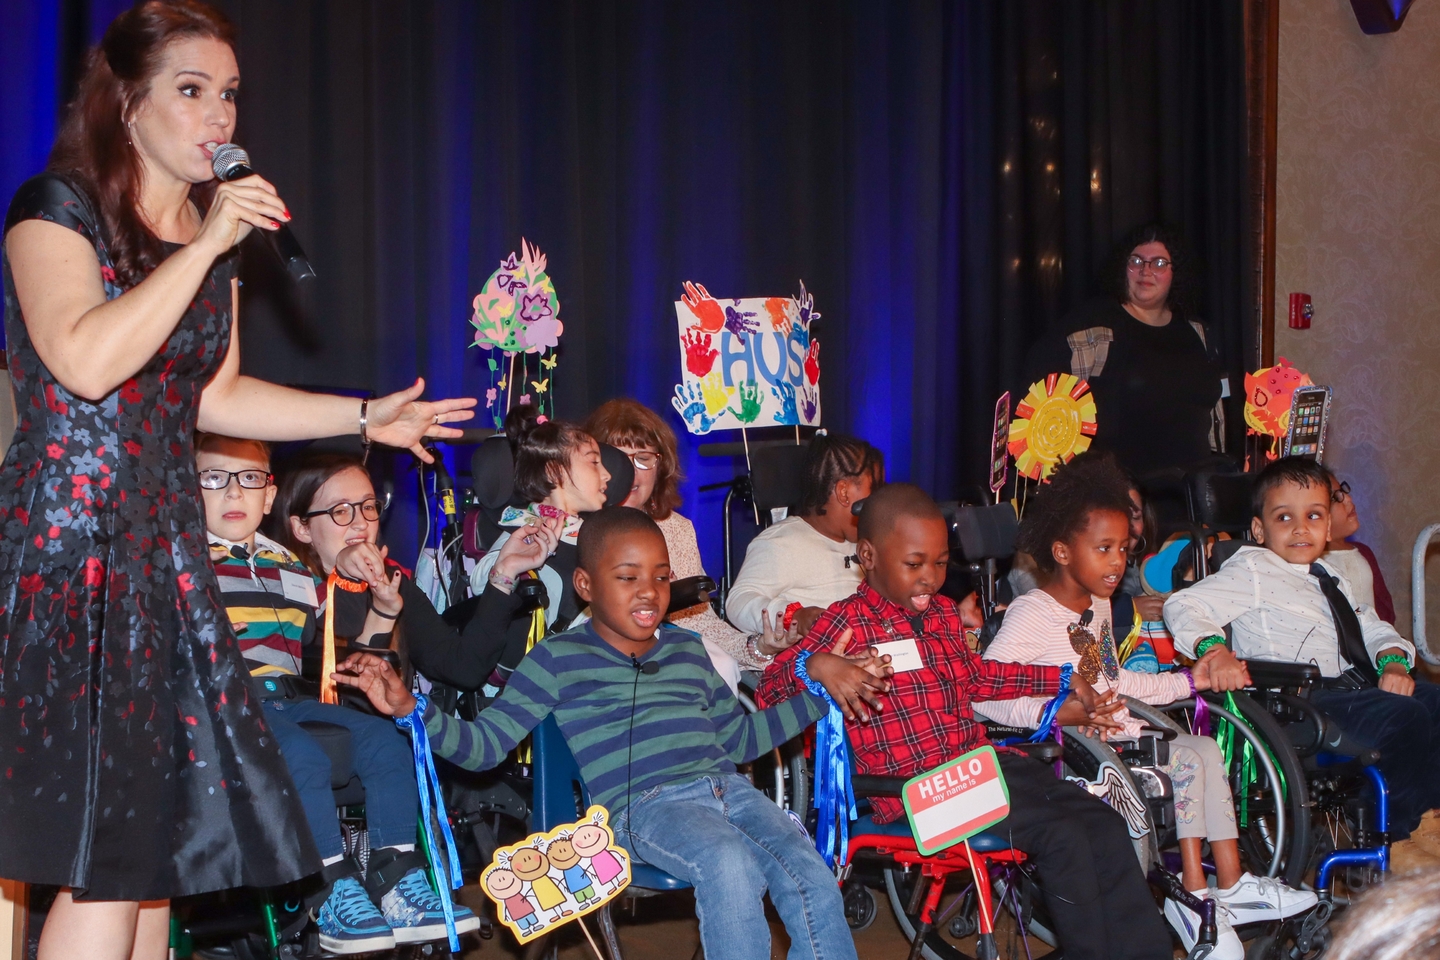 Broadway star Chilina Kennedy singing on stage with students at the Reach for a Star Luncheon